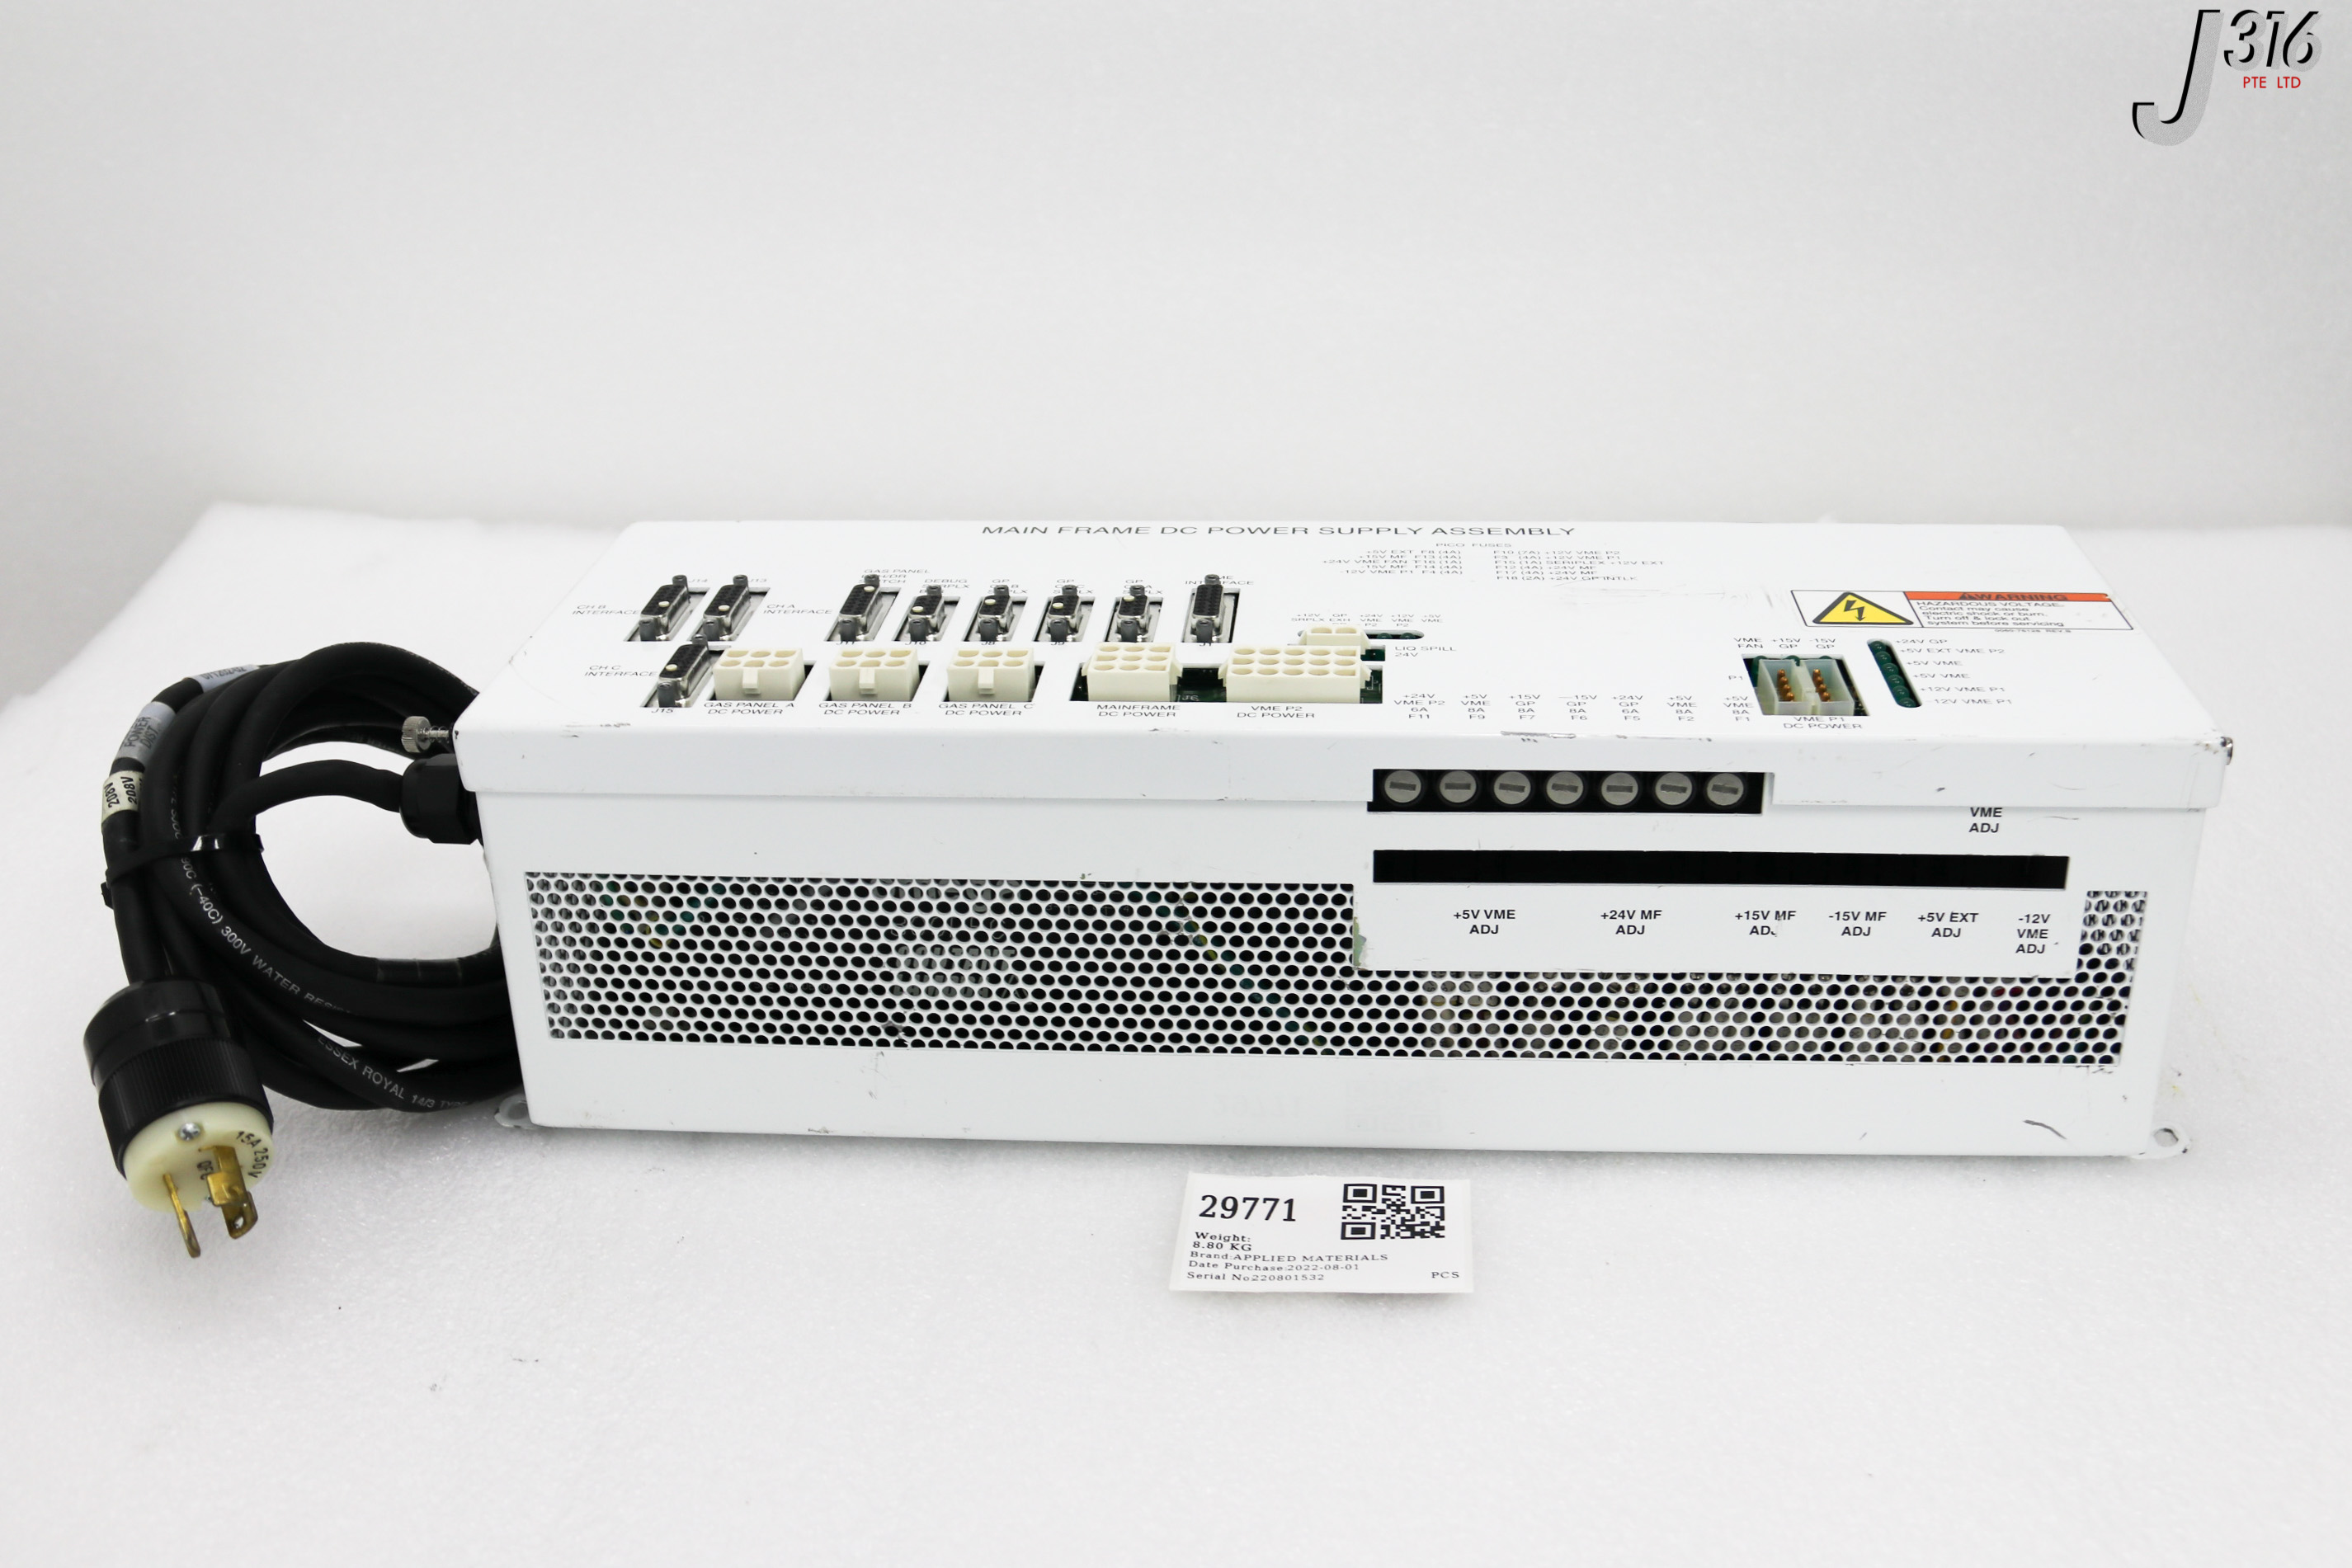 29771 APPLIED MATERIALS MAIN FRAME DC POWER SUPPLY ASSY 0040-07213  J316Gallery